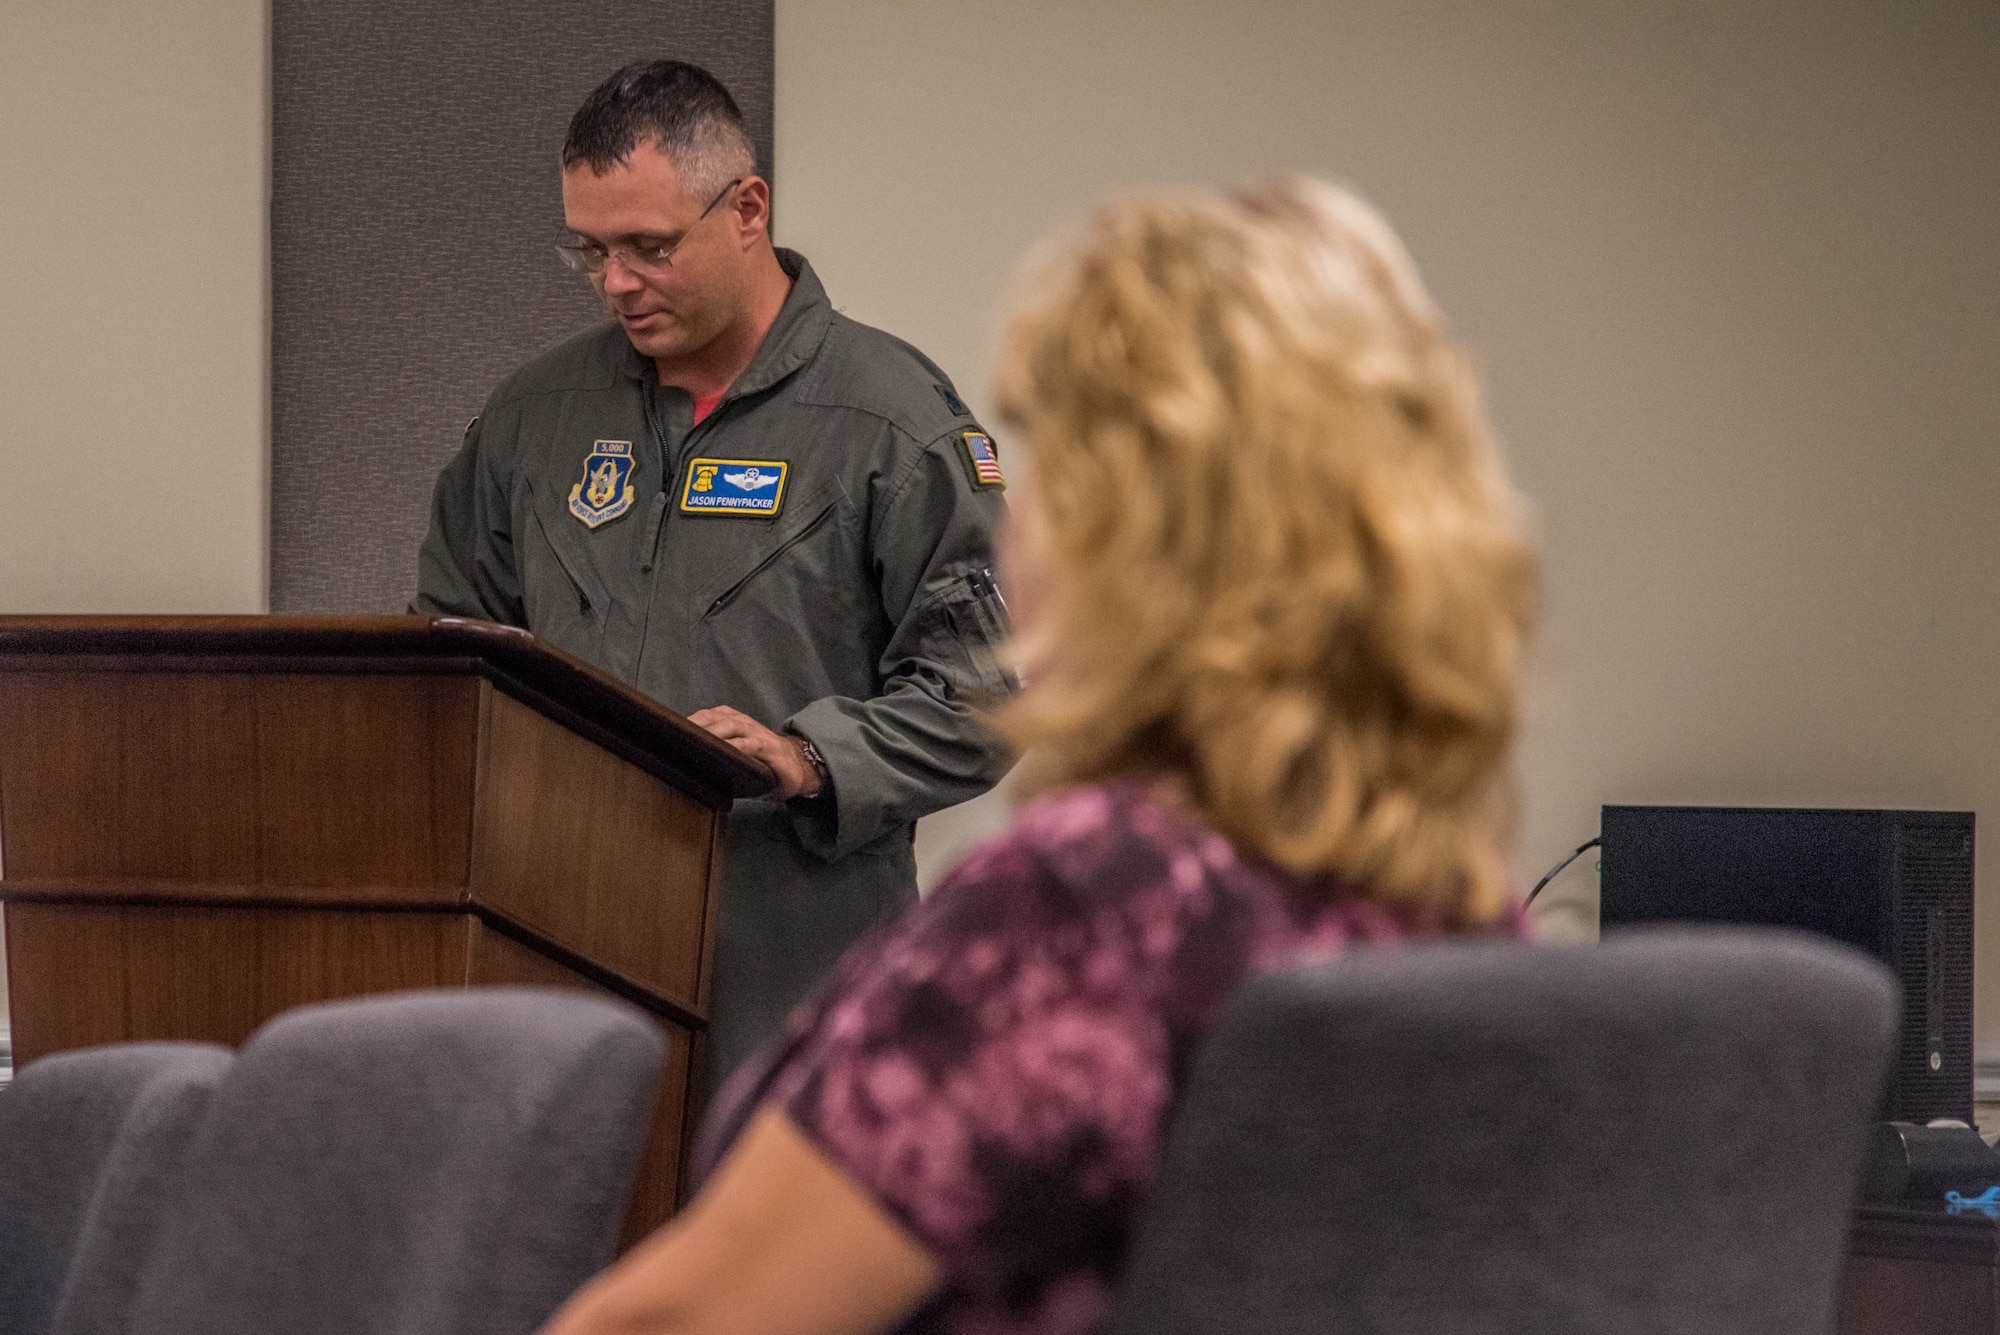 Lt. Col. Jason Pennypacker, left, 512th Operations Group deputy commander, speaks during a Delaware Aviation Hall of Fame inductee notification for retired Senior Master Sgt. Kathleen Lambert, a former 512th Airlift Wing loadmaster, right, at Dover Air Force Base, Del., Aug. 3, 2018. Pennypacker read Lambert's career highlights, which fit the criteria for selection into the Delaware Aviation Hall of Fame. (U.S. Air Force photo by Staff Sgt. Damien Taylor)